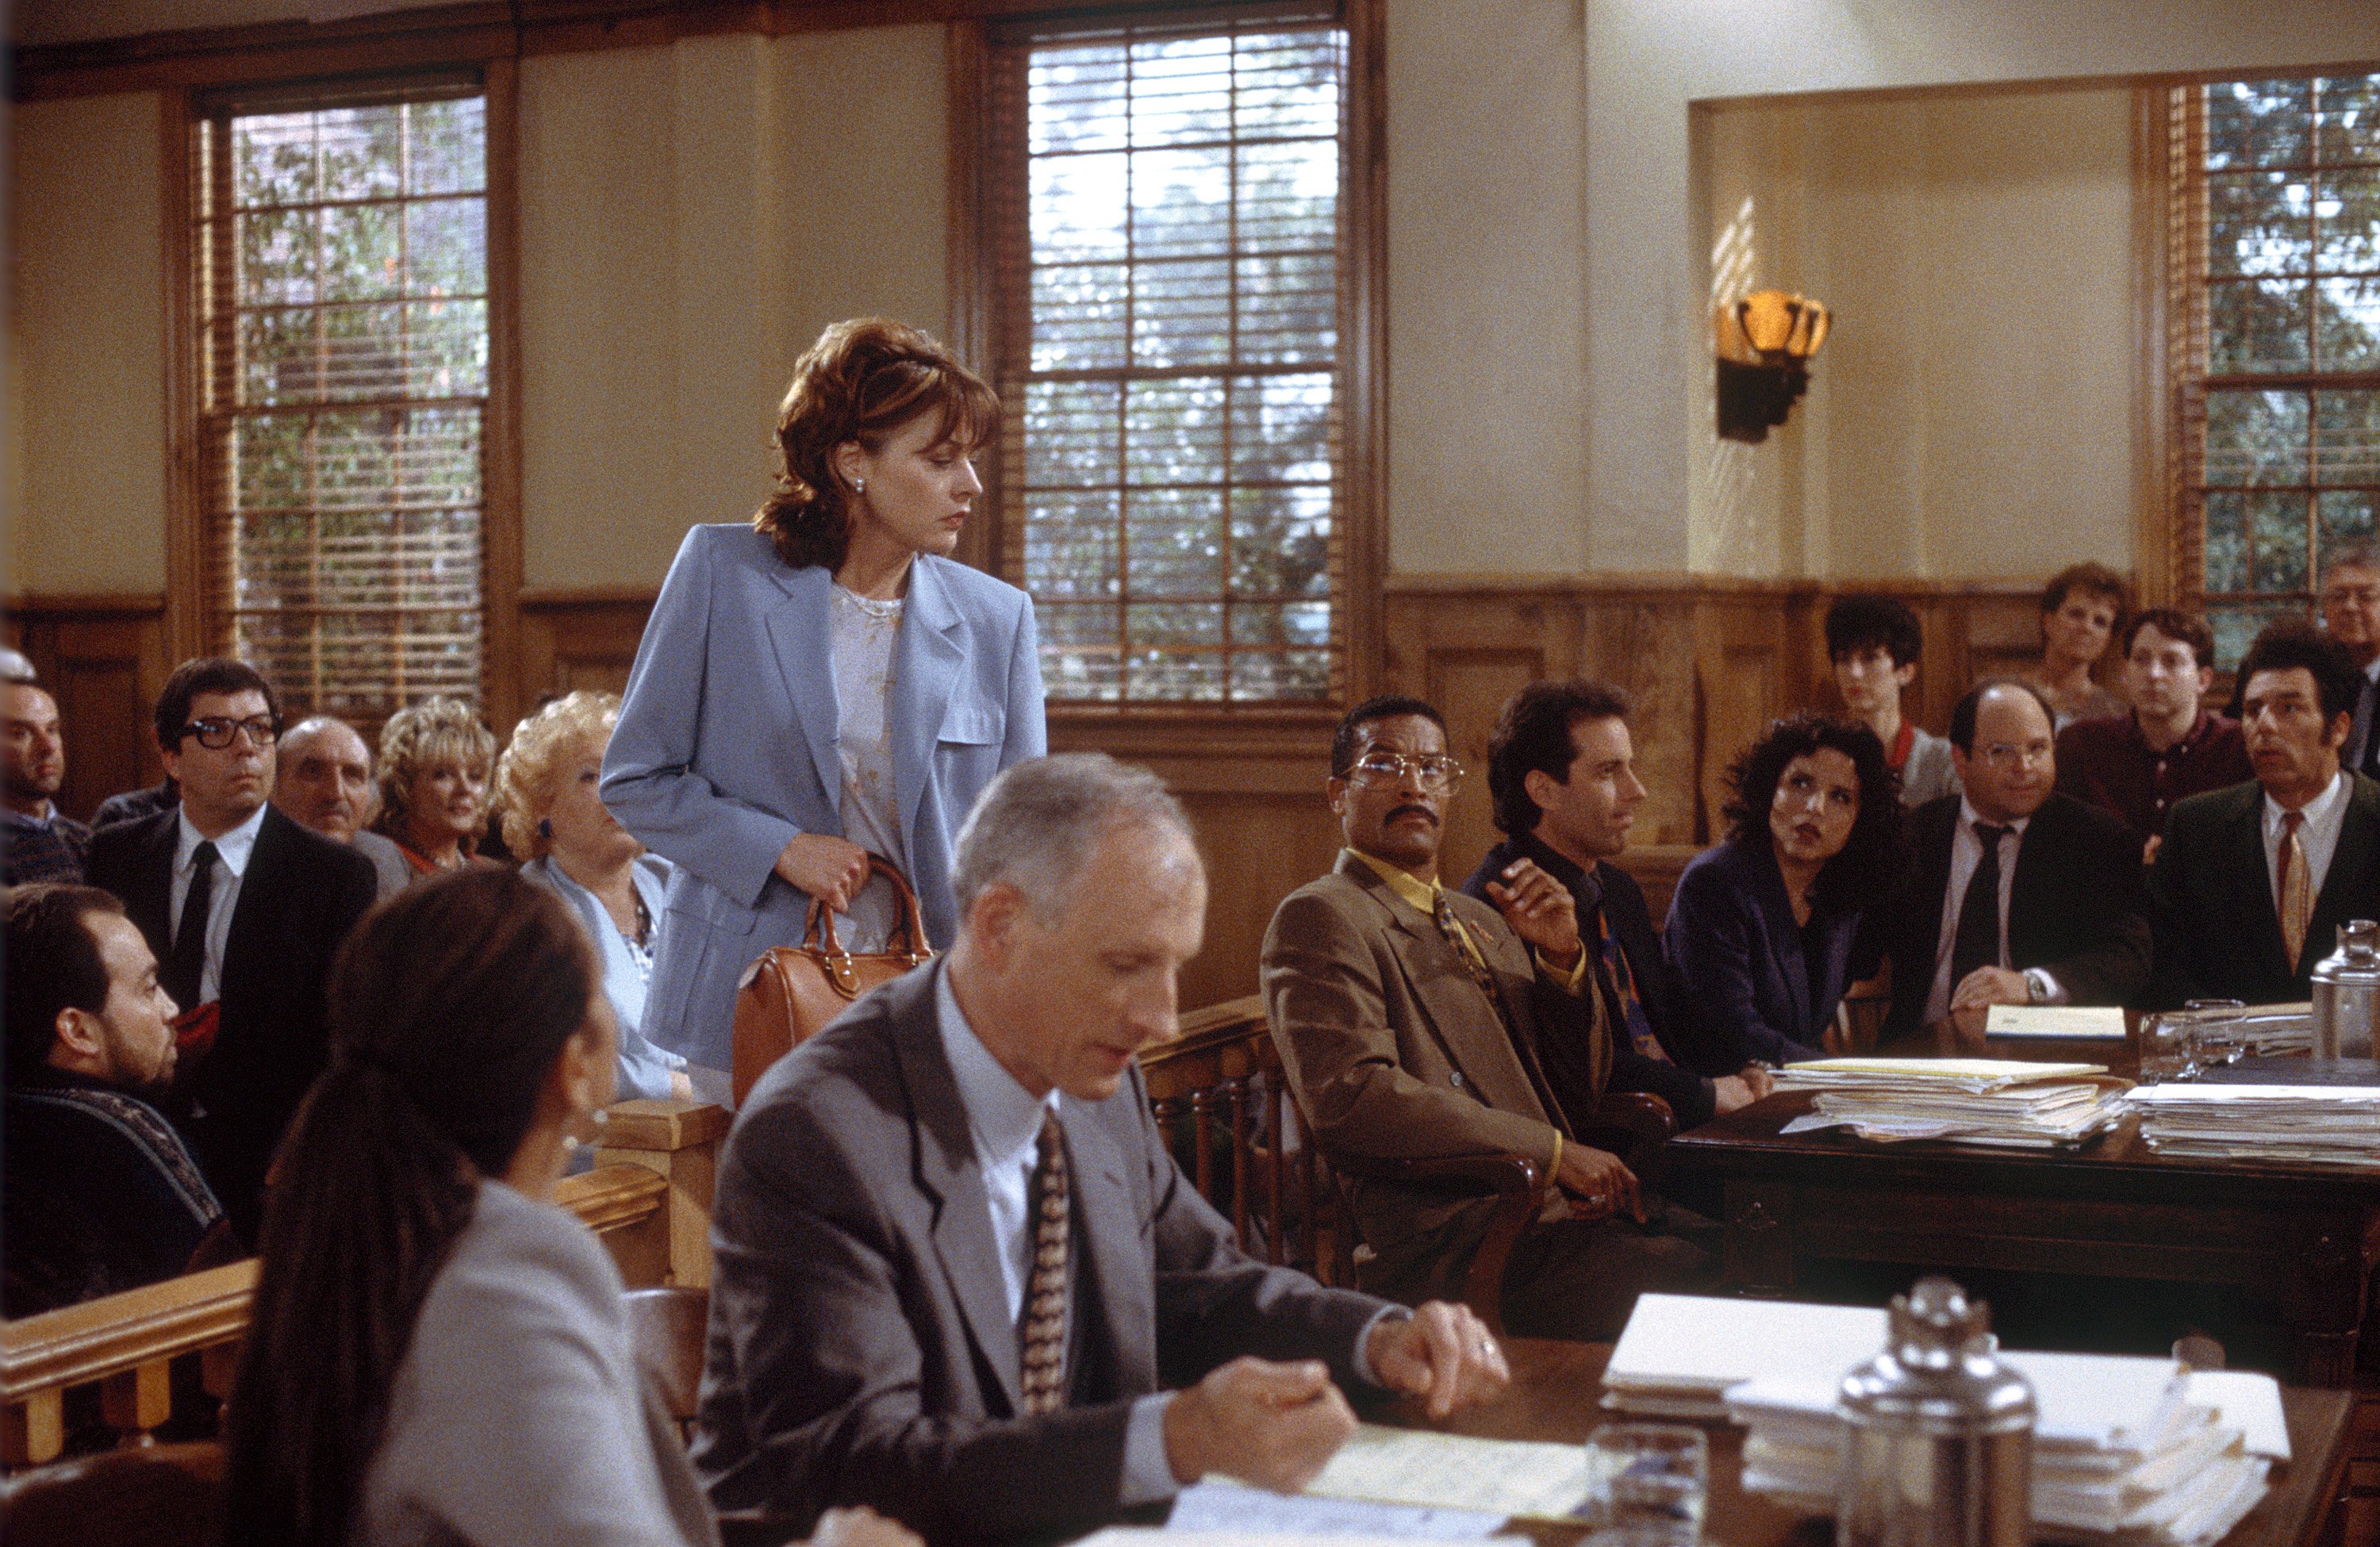 Marla Penny, along side D.A. Hoyt, Jackie Chiles, Jerry, Elaine Benes, George Costanza and Cosmo Kramer in a courthouse scene from the final episode of 'Seinfeld' in 1998